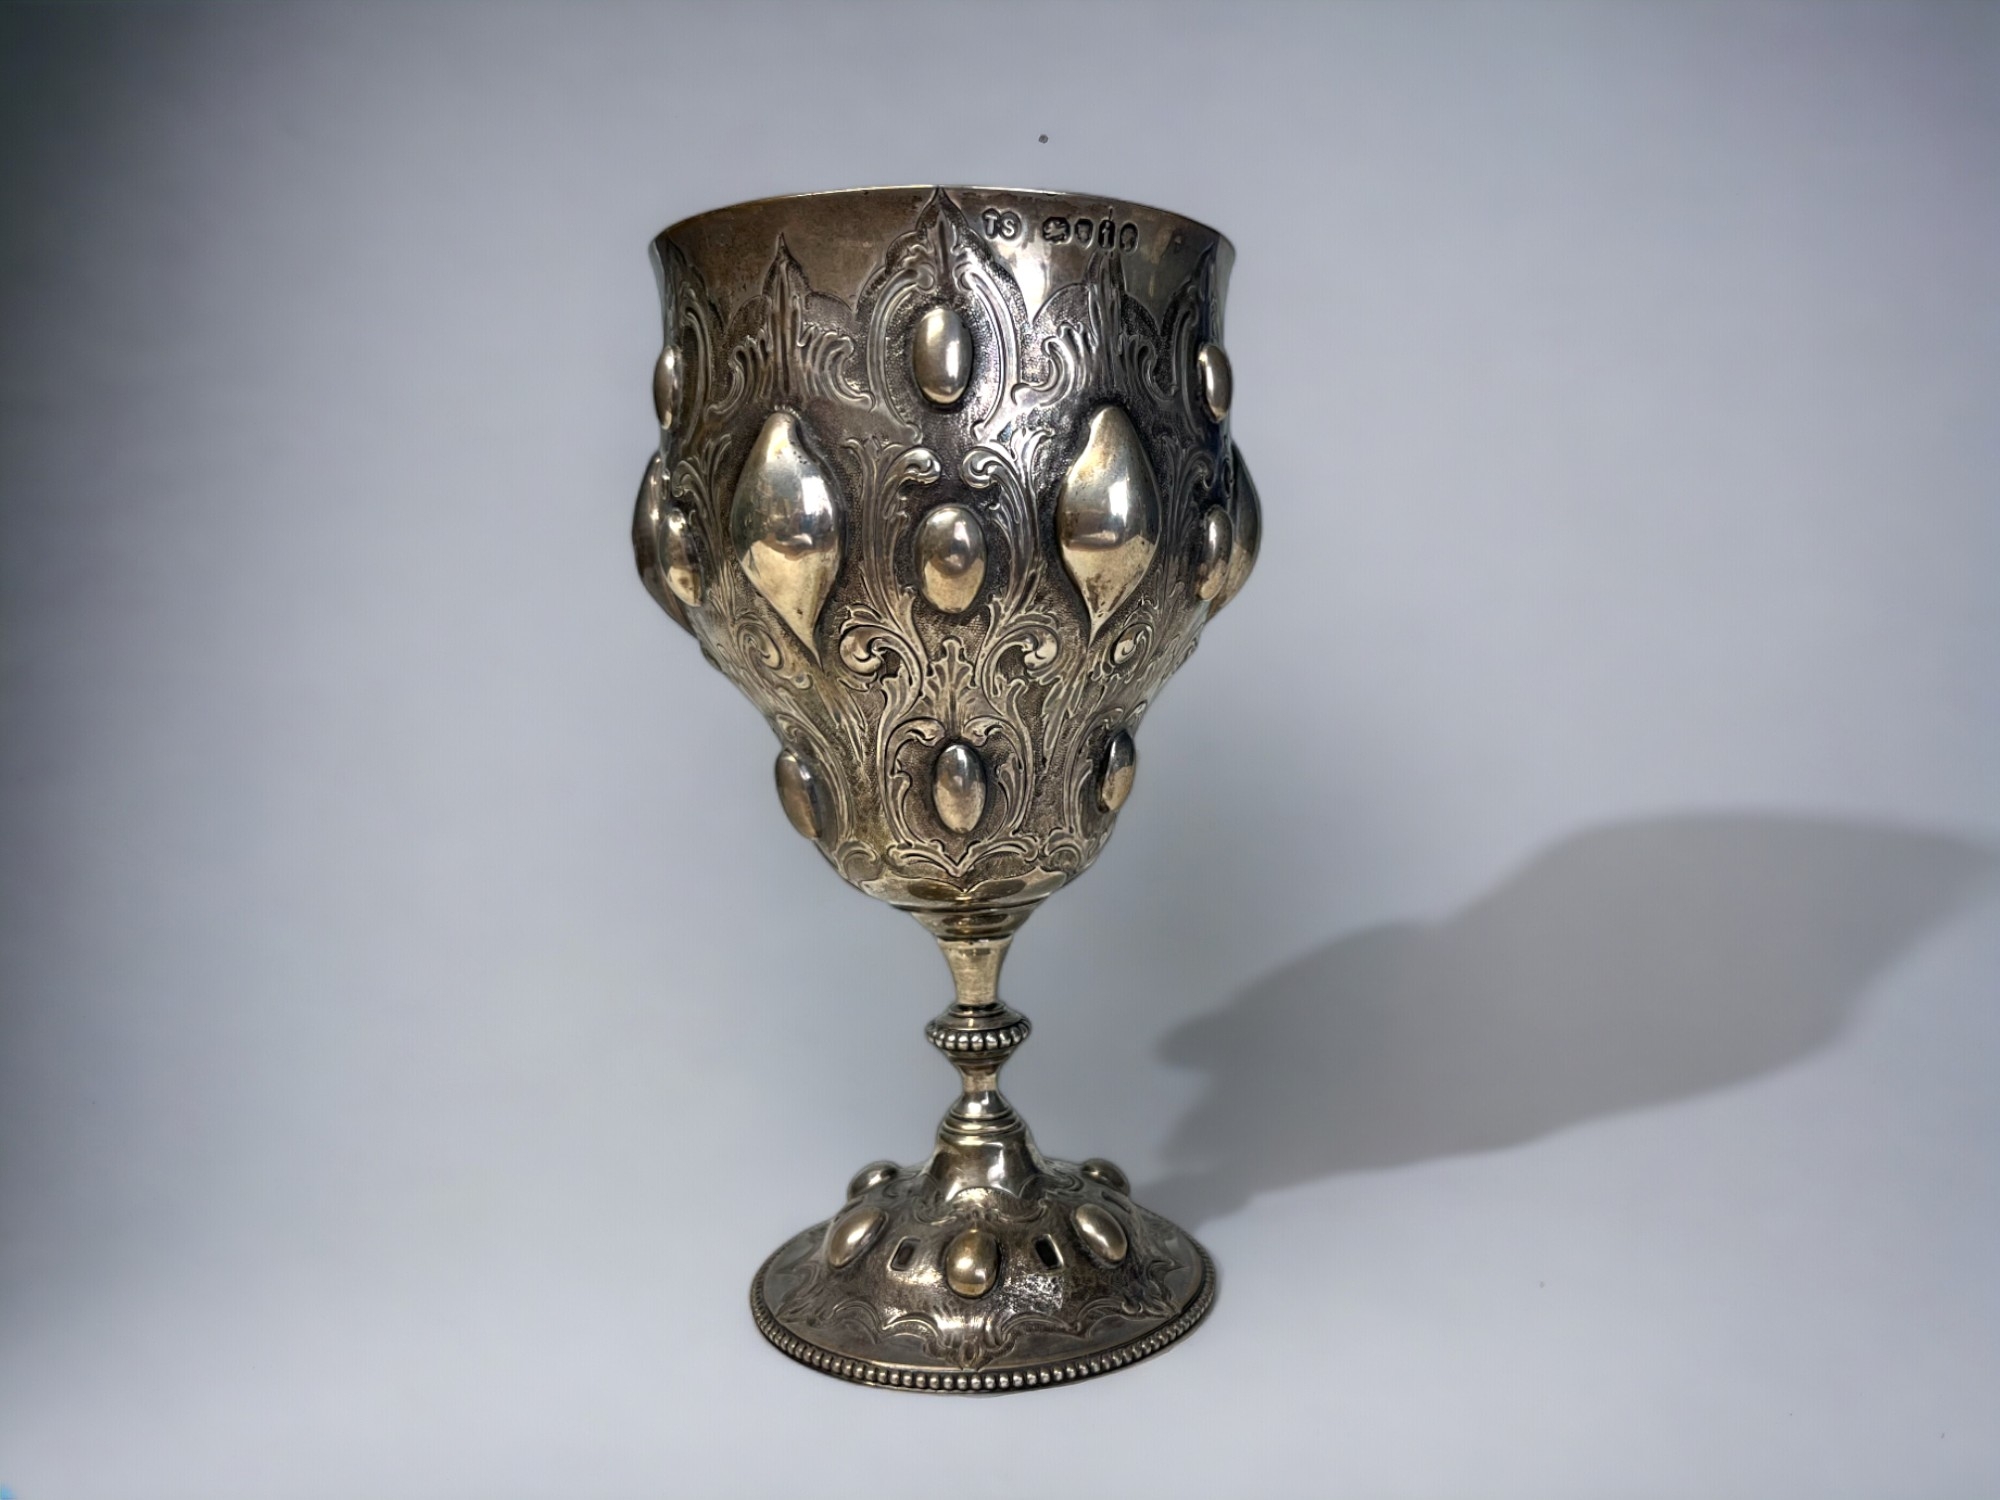 A 19th century sterling silver goblet. Thomas Smiley, London. London, 1864 hallmarks. Height - 15cm